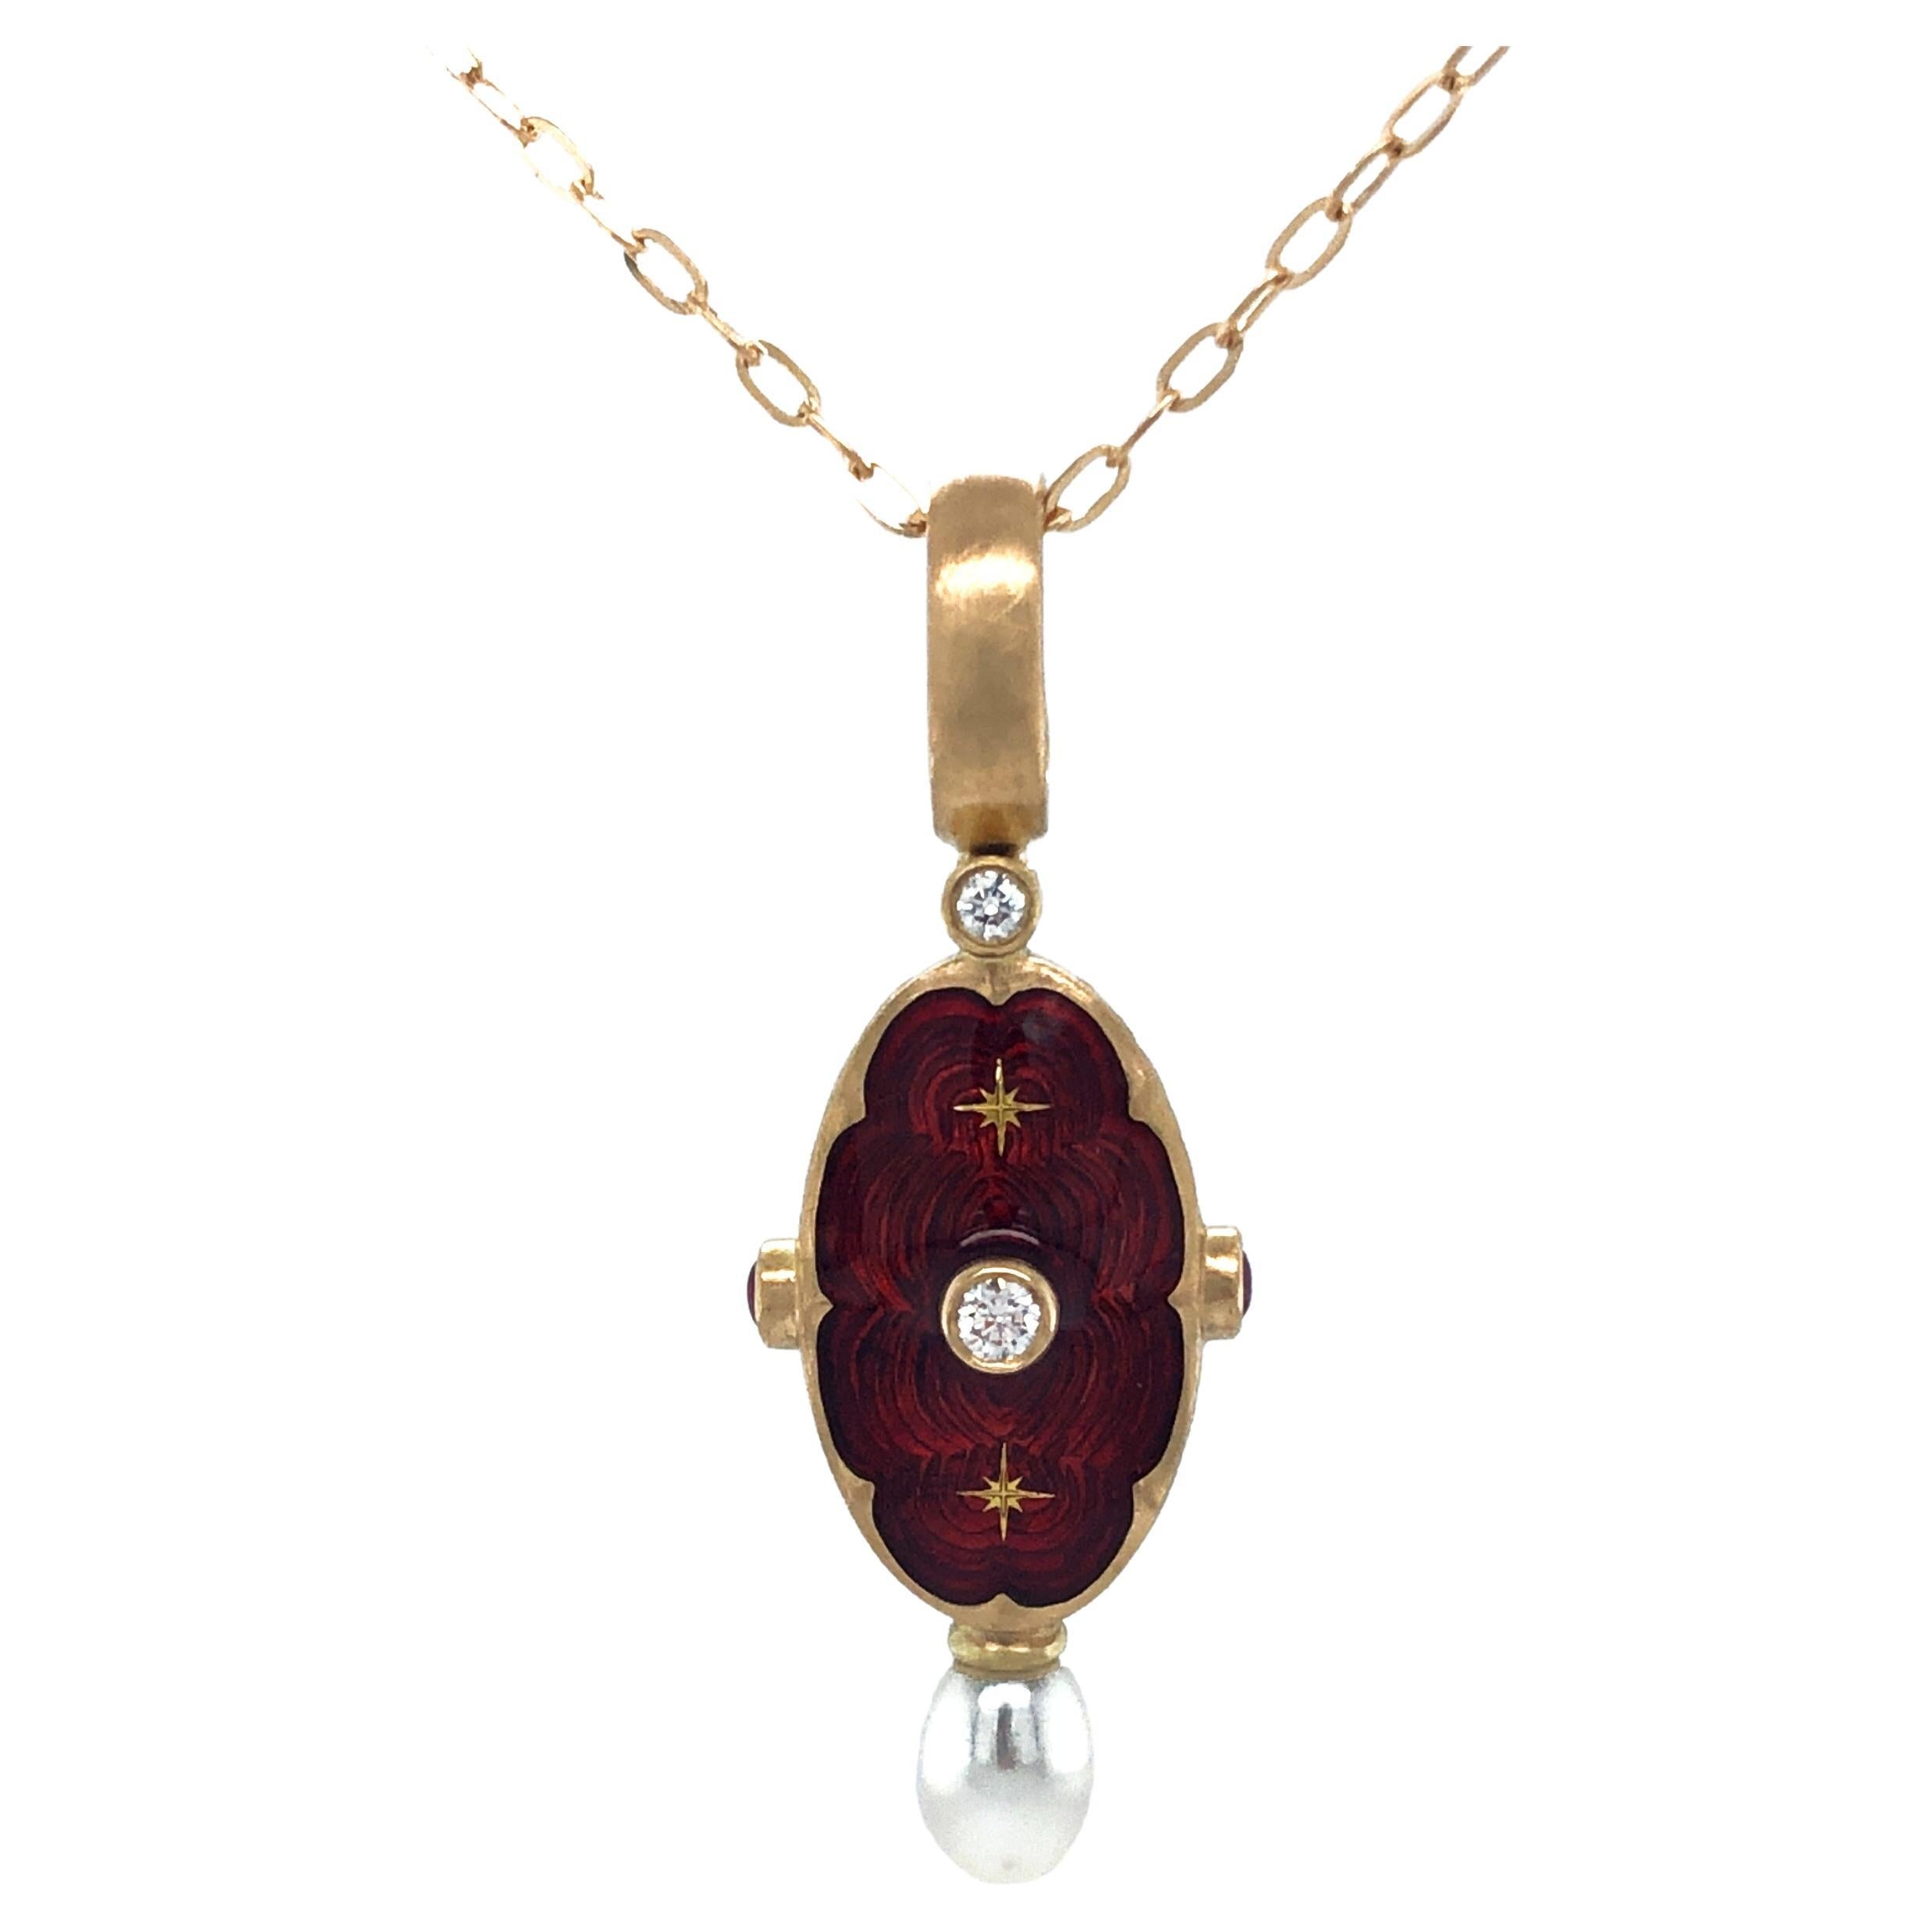 Oval Pendant Necklace 18k Yellow Gold Red Enamel 2 Rubies 1 Pearl 2 Star Paillon For Sale